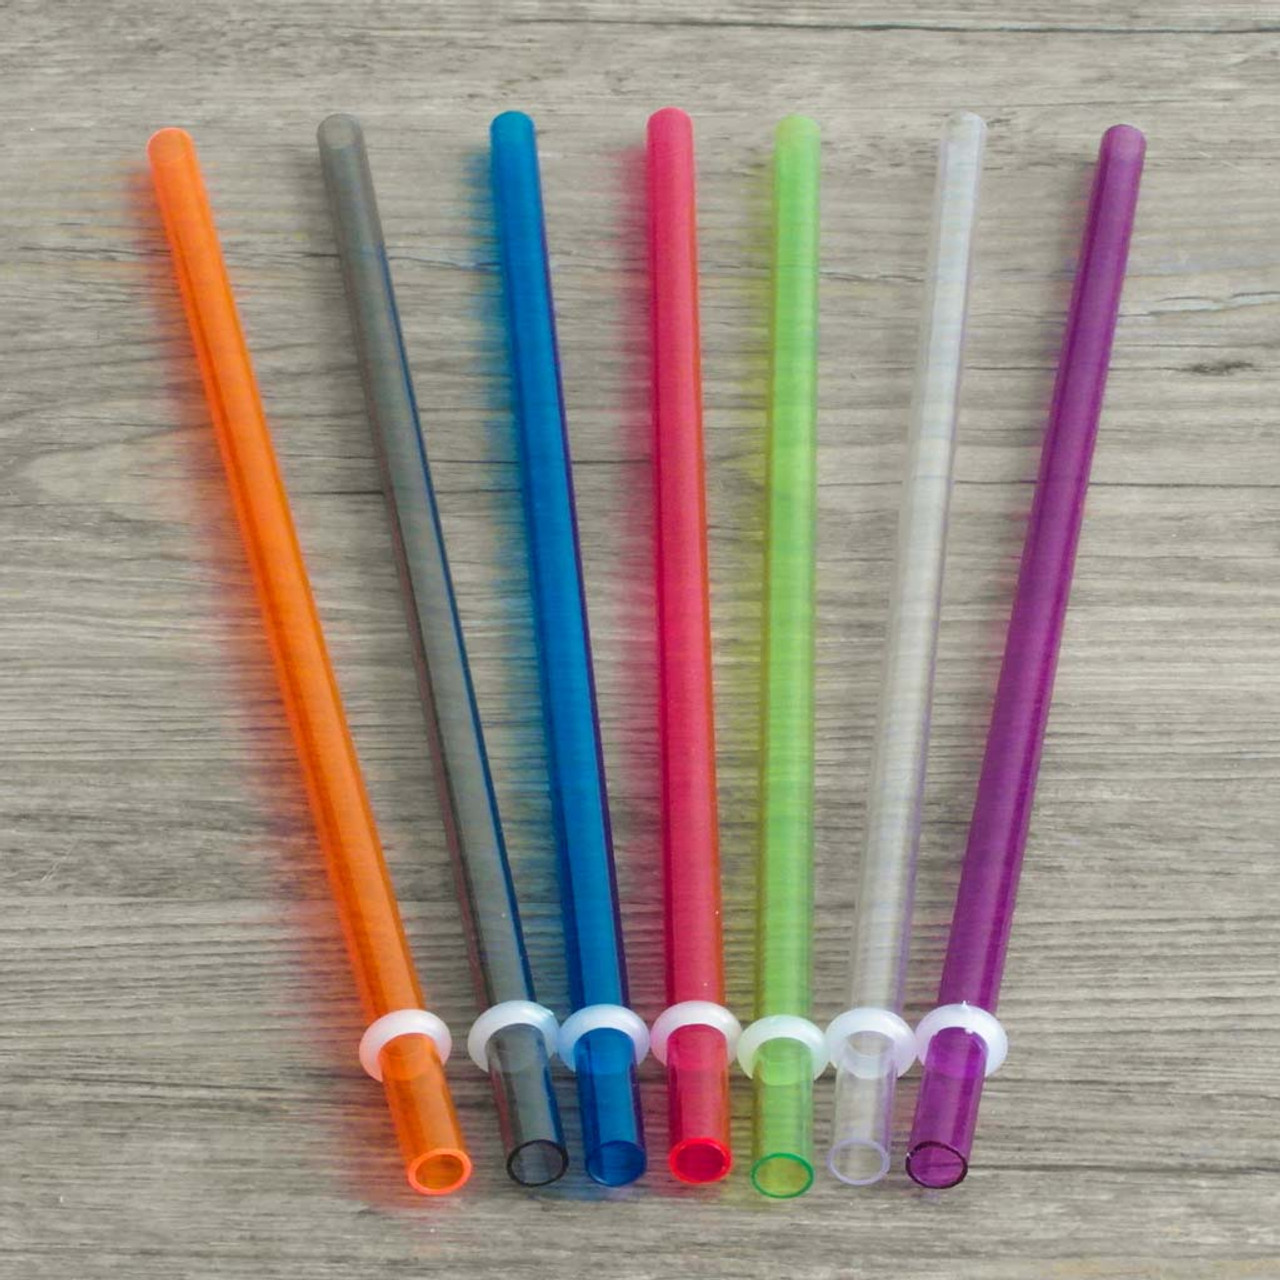 https://cdn11.bigcommerce.com/s-66baa/images/stencil/1280x1280/products/948/6037/Reusable_Colored_Plastic_Straws_9inch__03388.1412981065.jpg?c=2